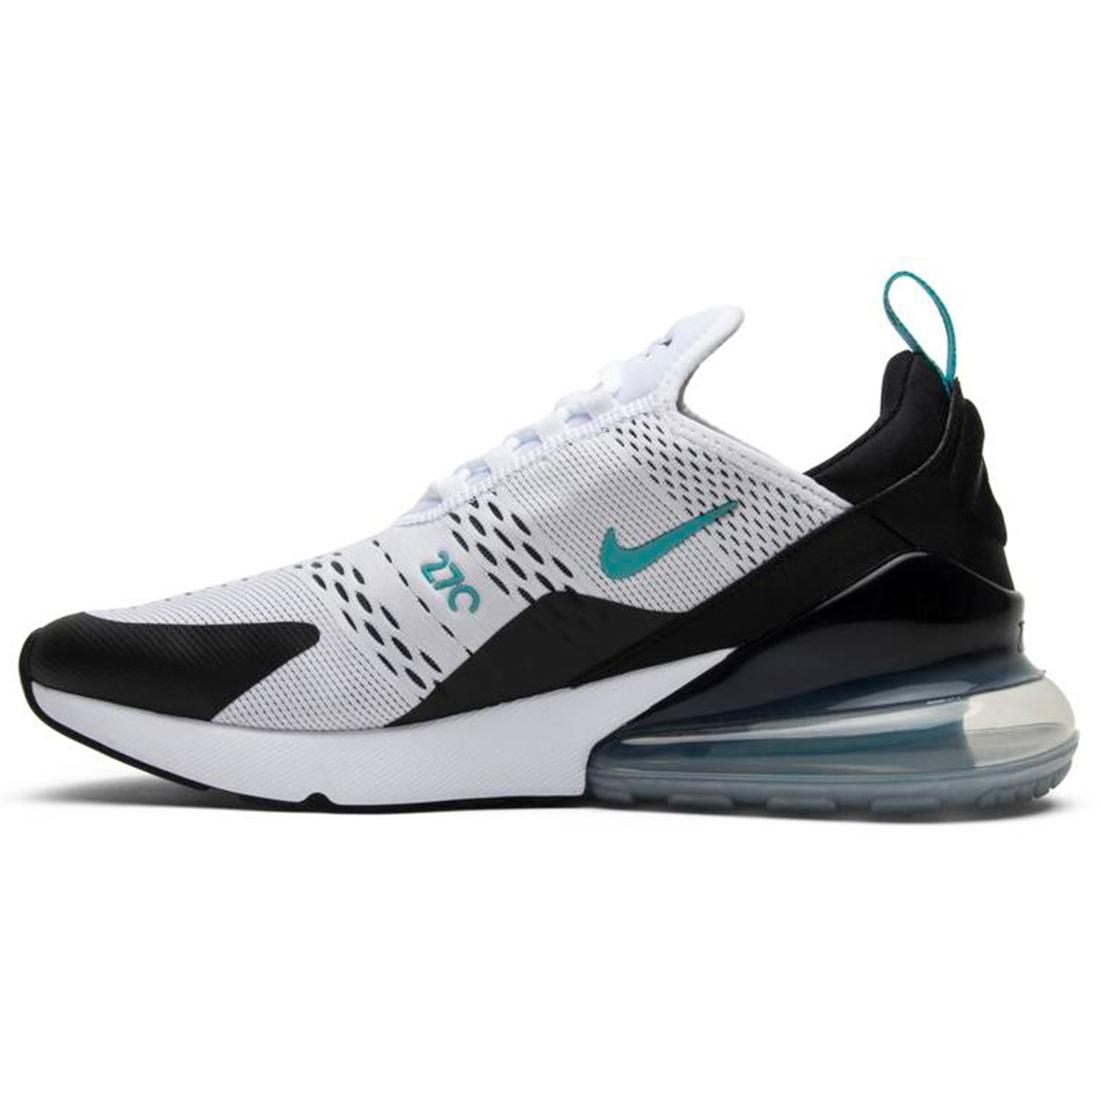 Air Max 270 Dusty Cactus Nike Shoes Sport Shoes Outlet